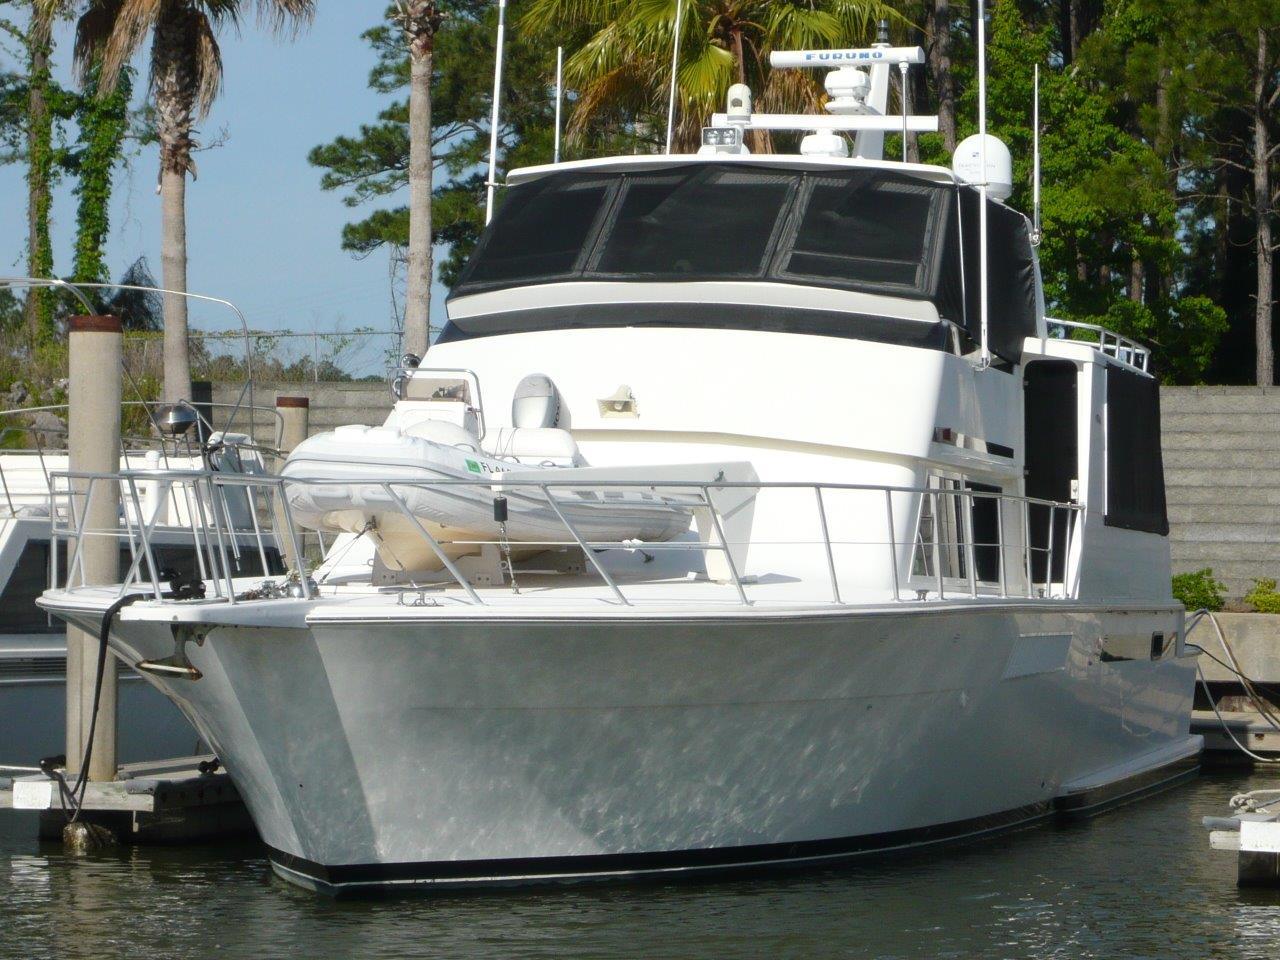 Dreamin Yacht for Sale, 60 Viking Yachts Gulfport, MS